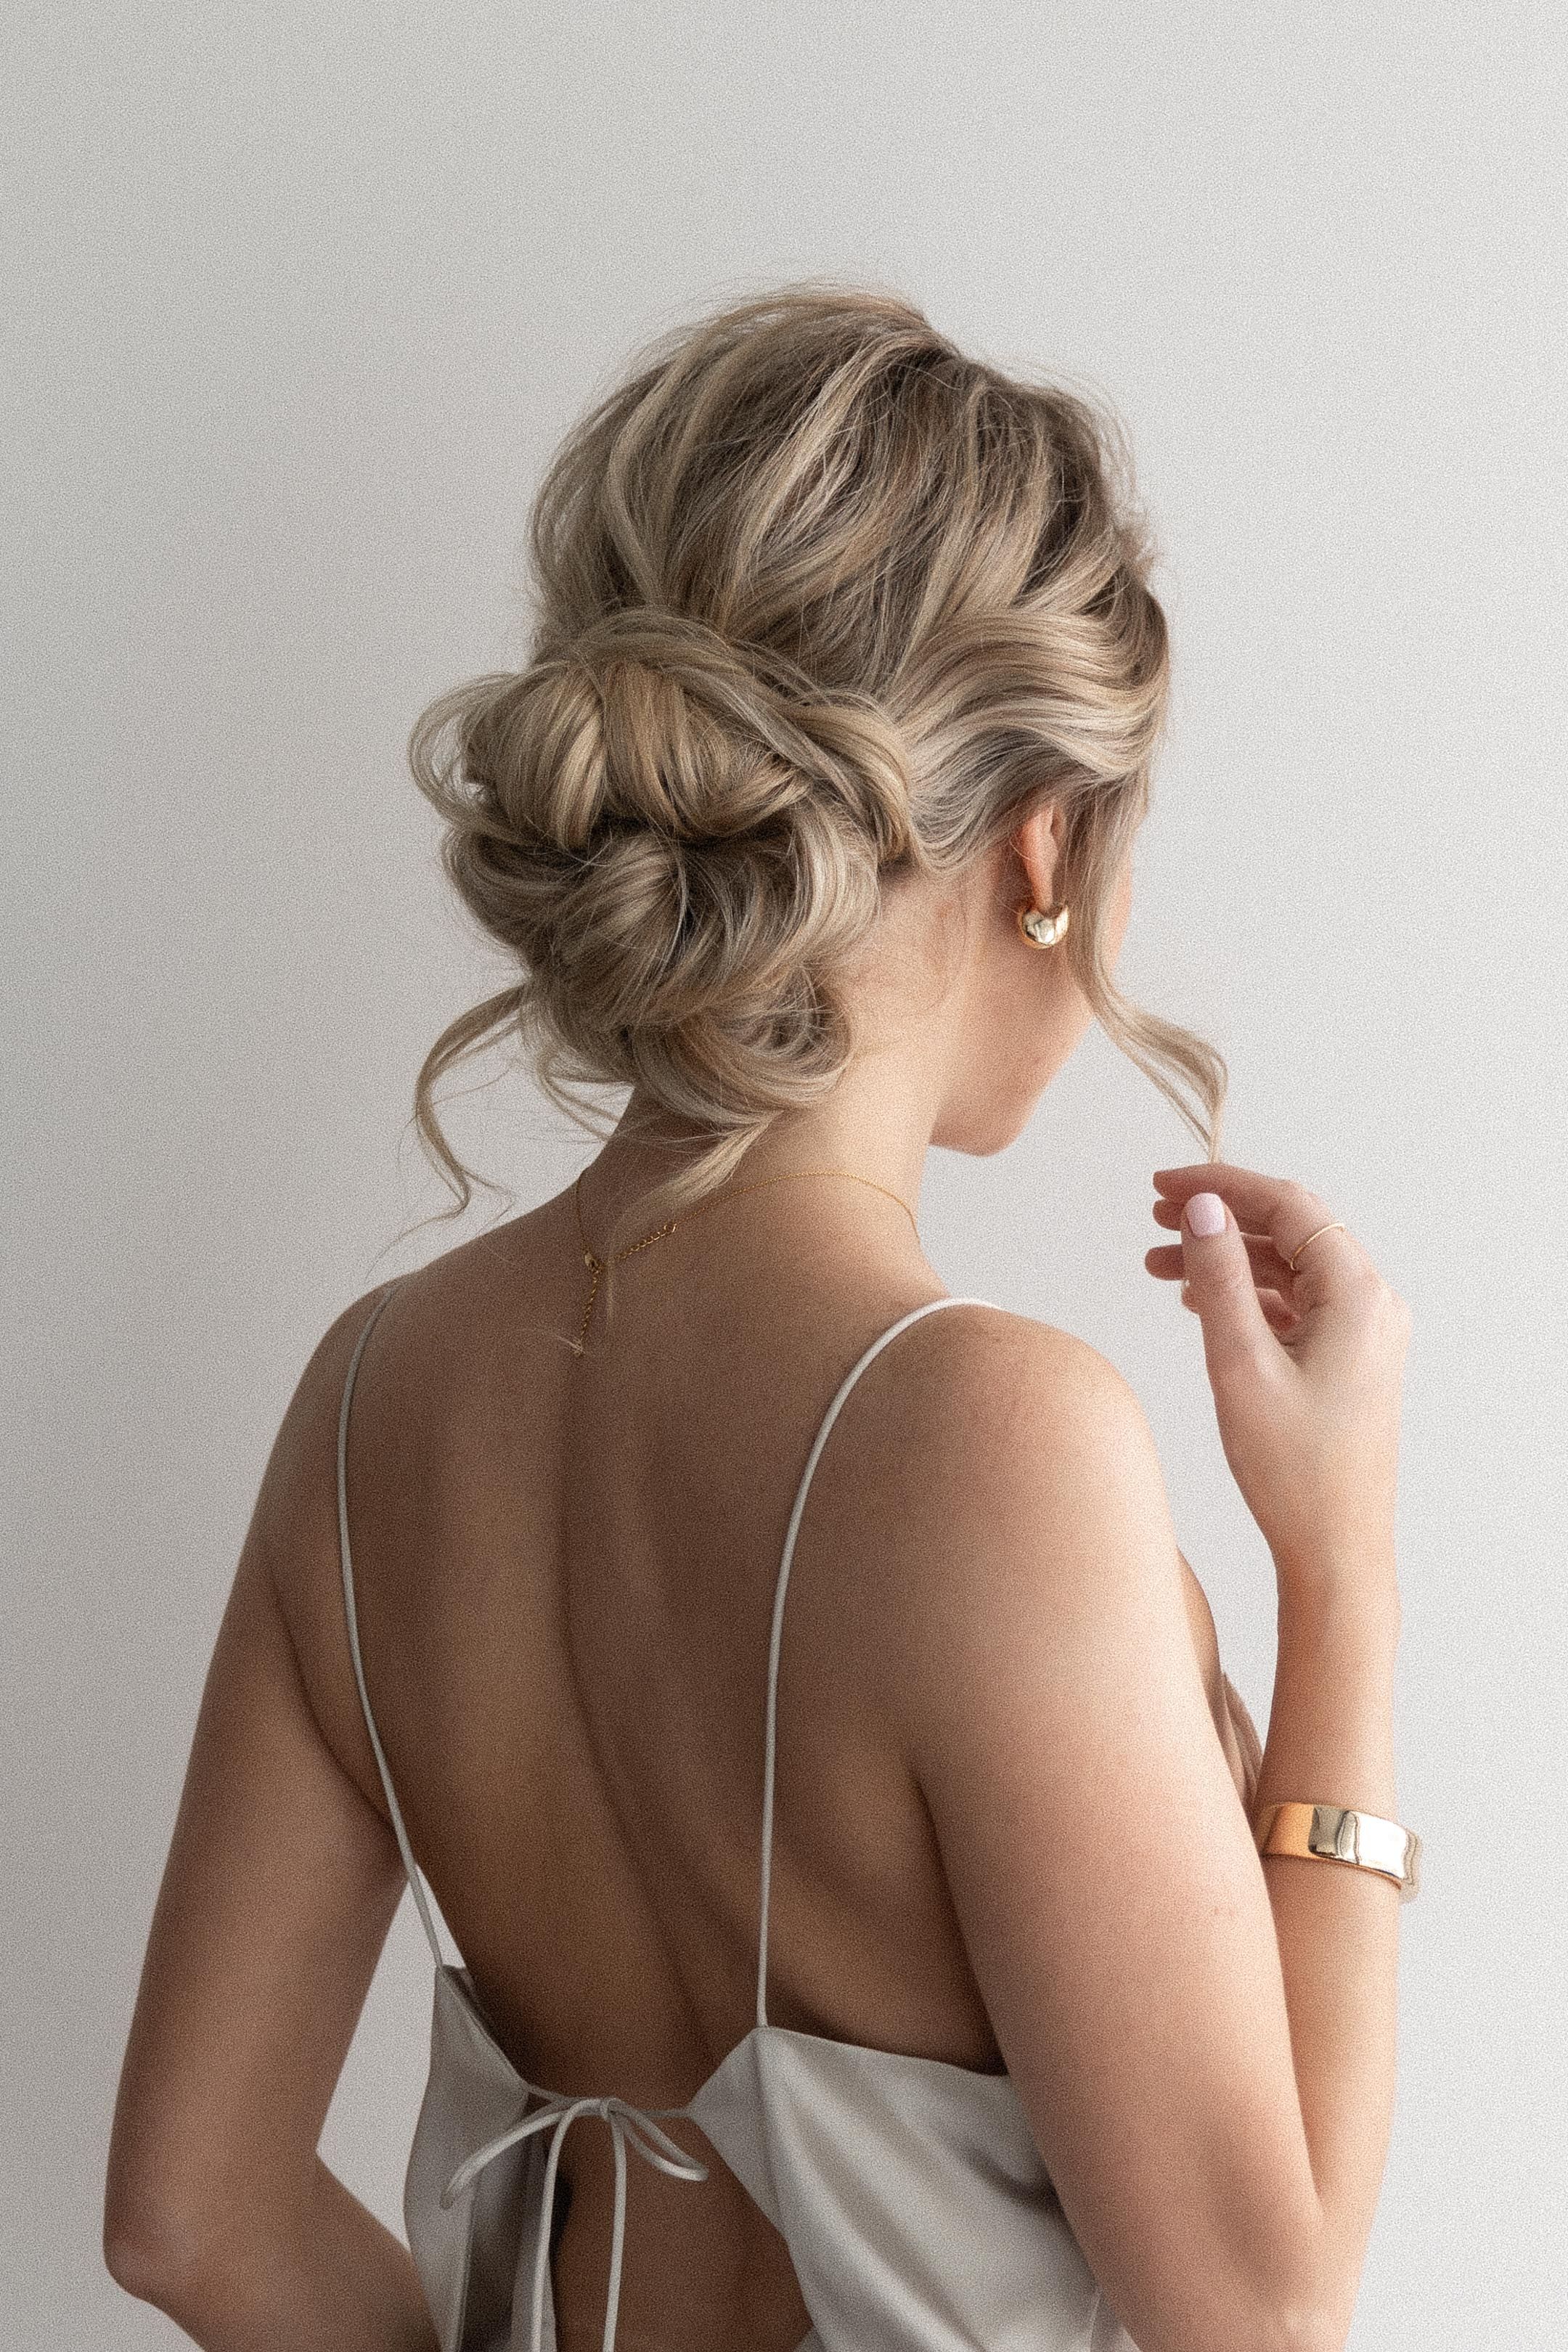 Most Recently Released Bridesmaid’s Updo For Long Hair In Easy Messy Updo Hairstyle (View 4 of 15)